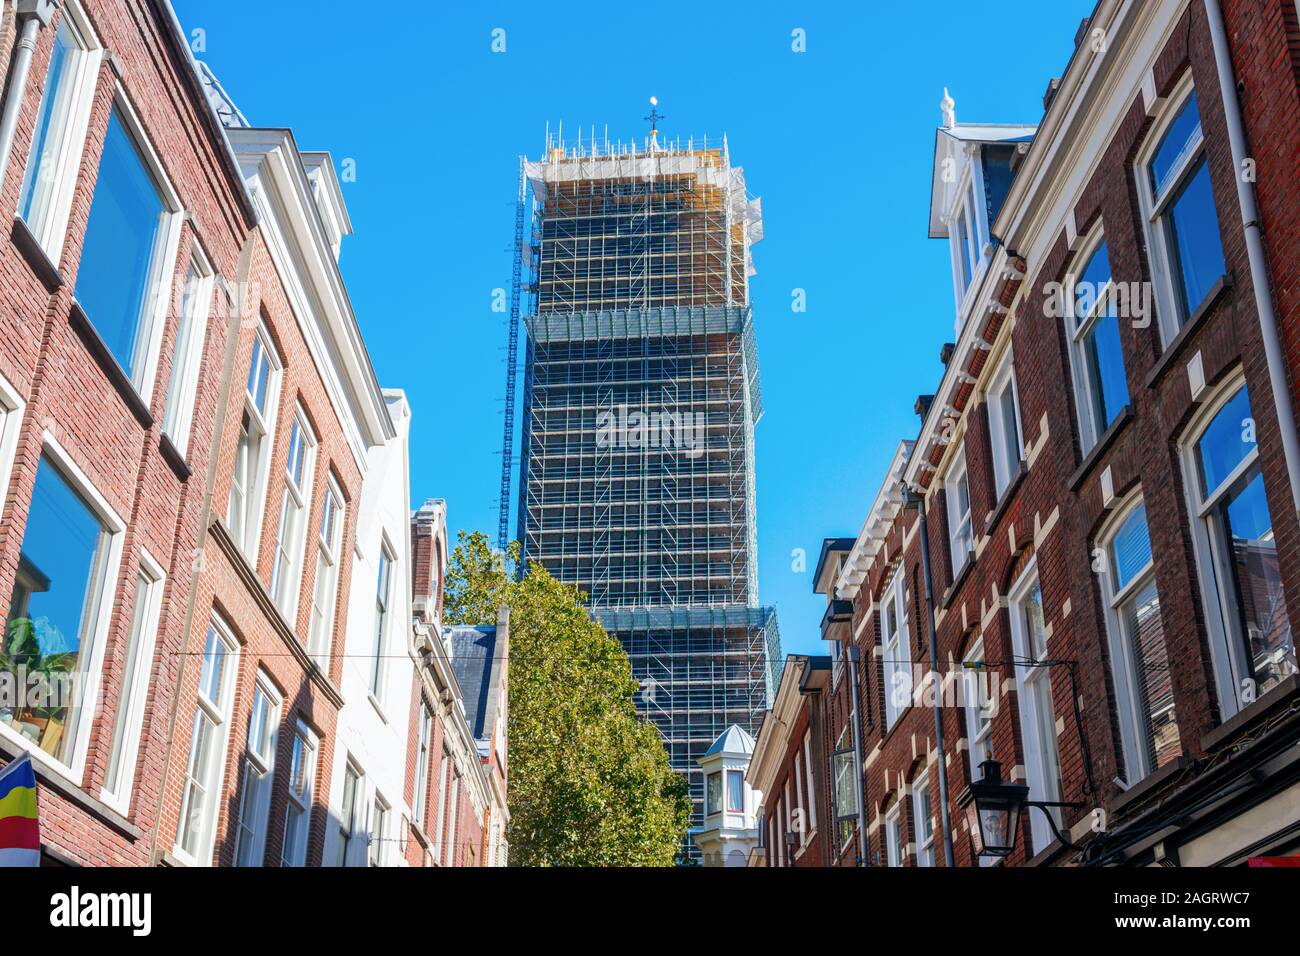 Dom Tower of the St. Martins Cathedral on a sunny day viewed from the Zadelstraat (Saddle Street), completely surrounded by scaffolding due to renovat Stock Photo